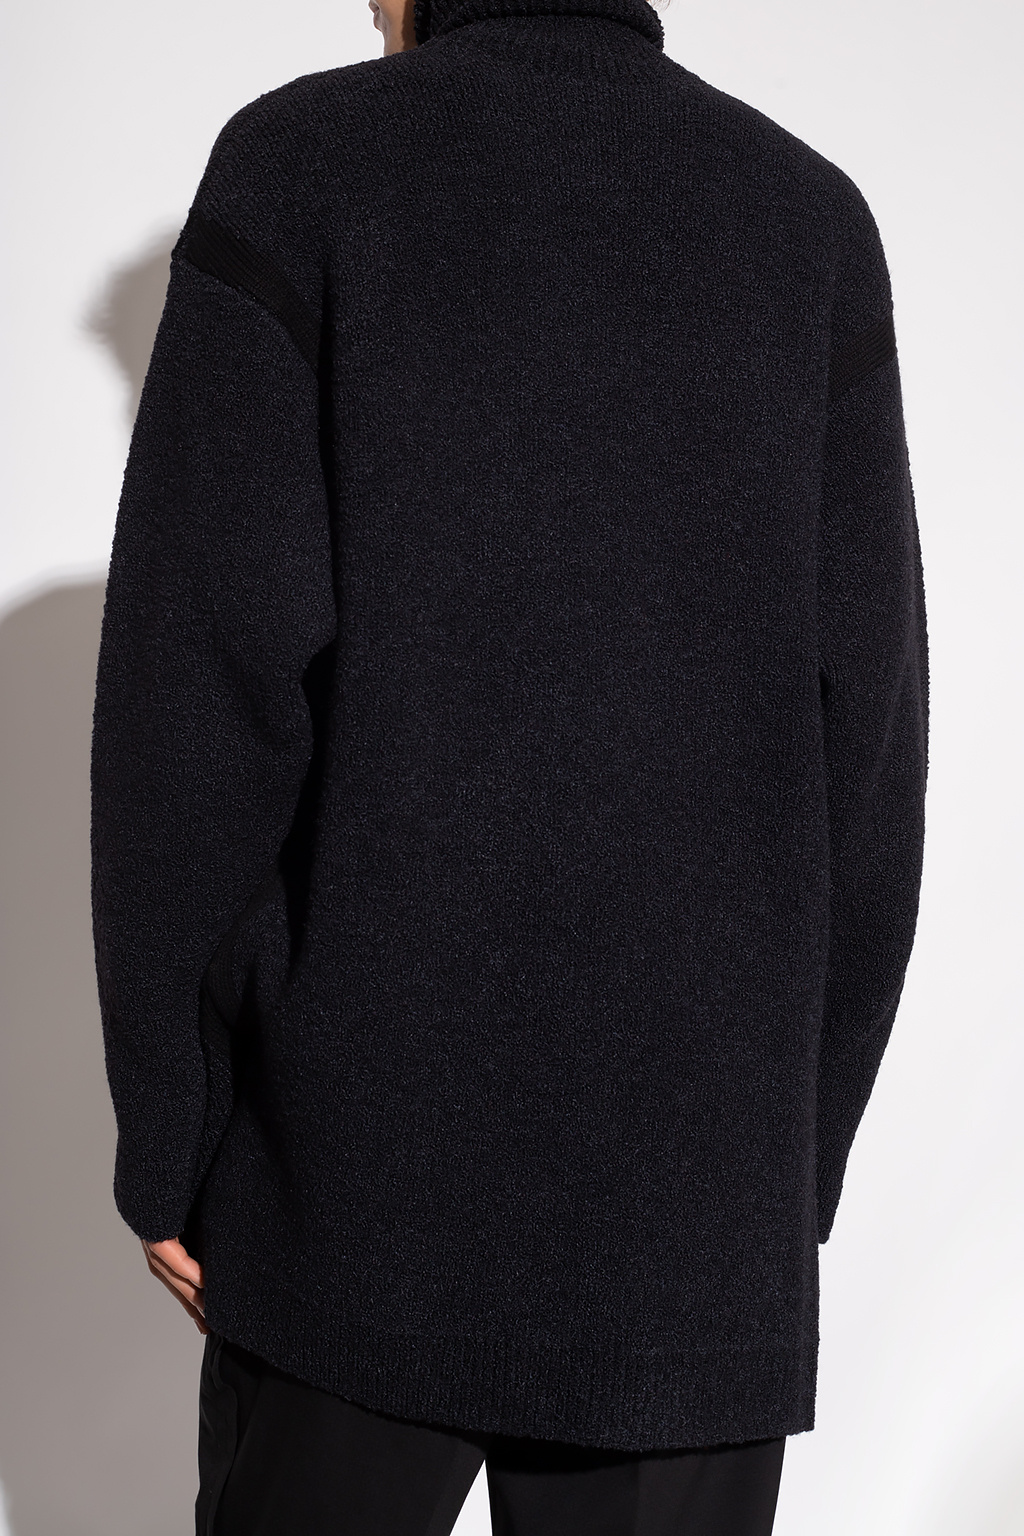 Off-White Turtleneck Rules sweater